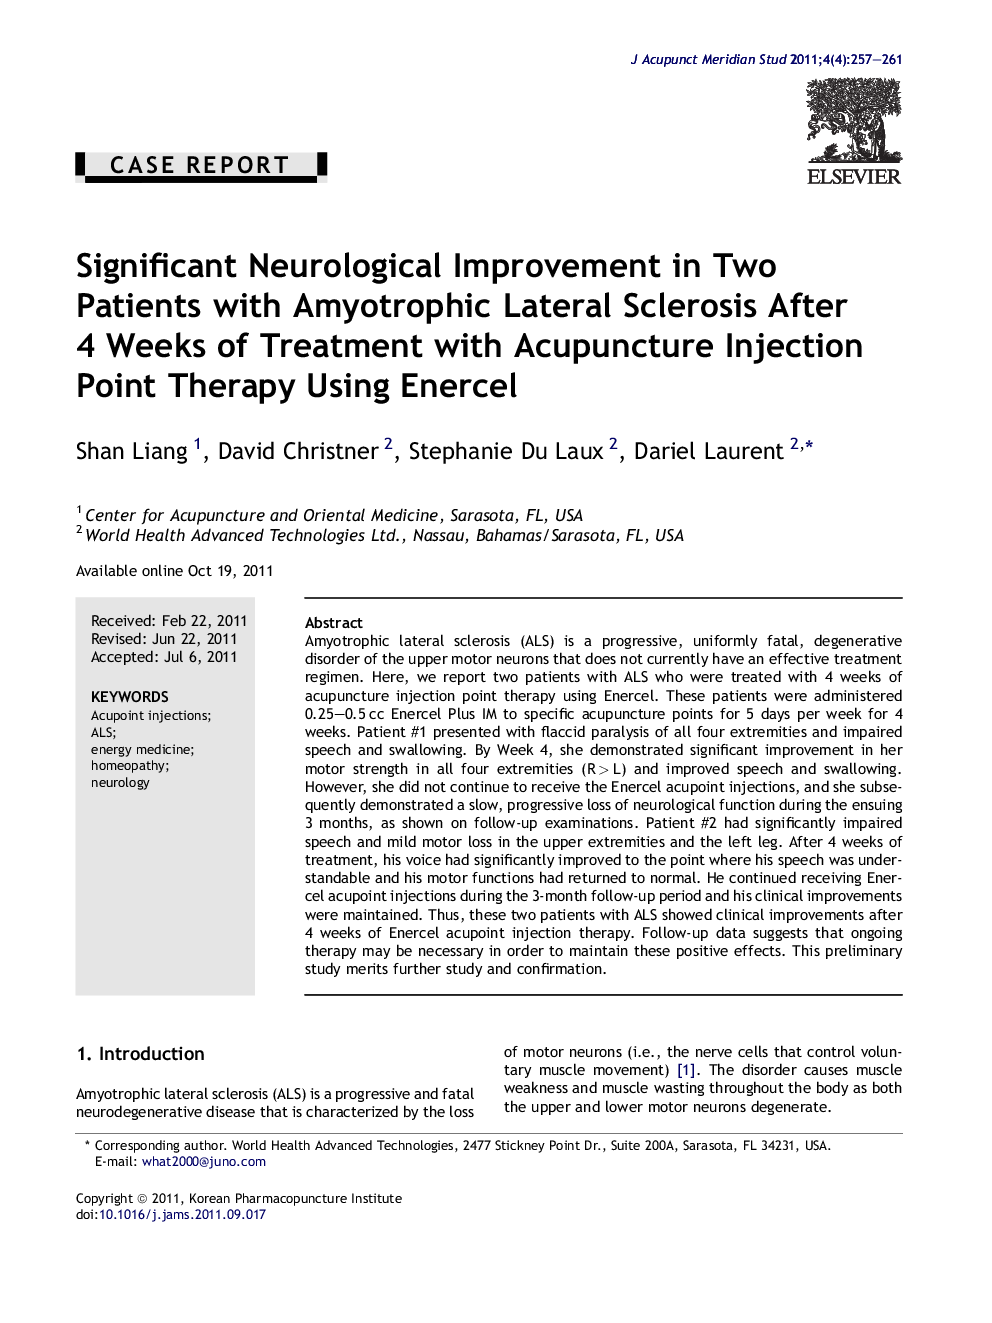 Significant Neurological Improvement in Two Patients with Amyotrophic Lateral Sclerosis After 4 Weeks of Treatment with Acupuncture Injection Point Therapy Using Enercel